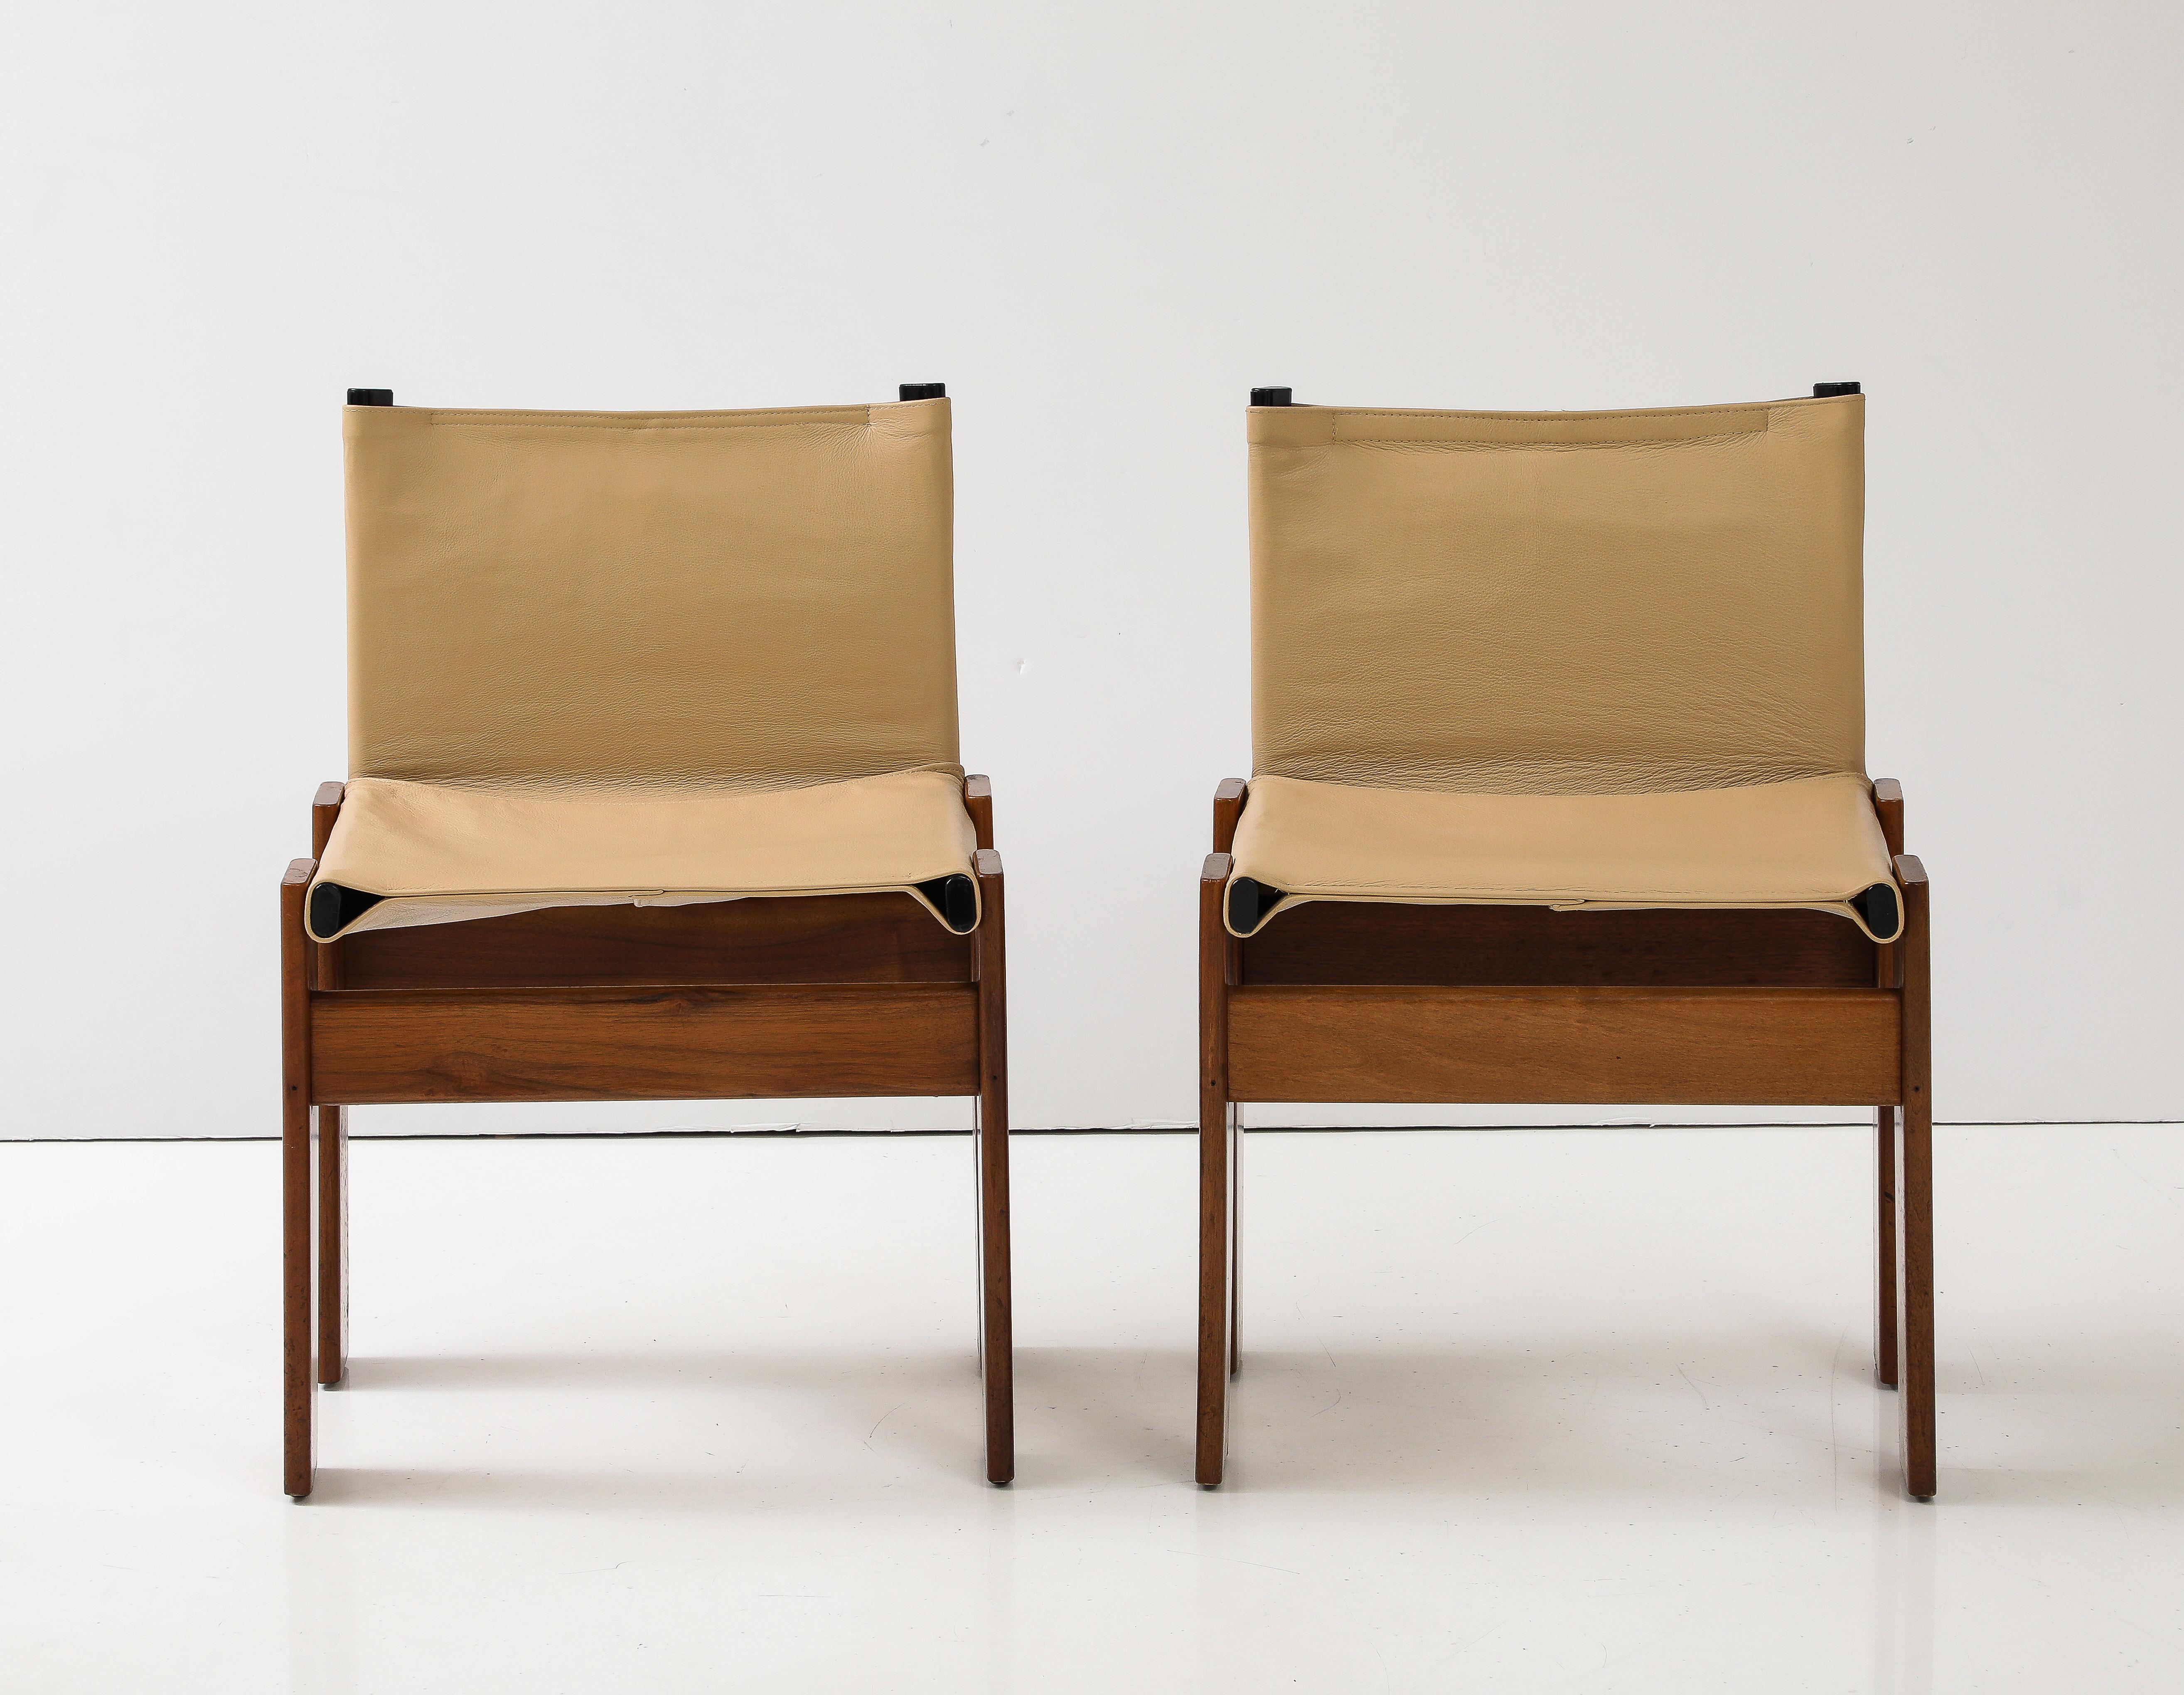 Afra and Tobia Scarpa Pair of 'Monk' Chairs for Molteni, Italy, circa 1974 

A simplified and solid design by Italian award-winning designer couple Afra & Tobia Scarpa, the 'Monk' model is composed of two equal trestles in solid wood attached to